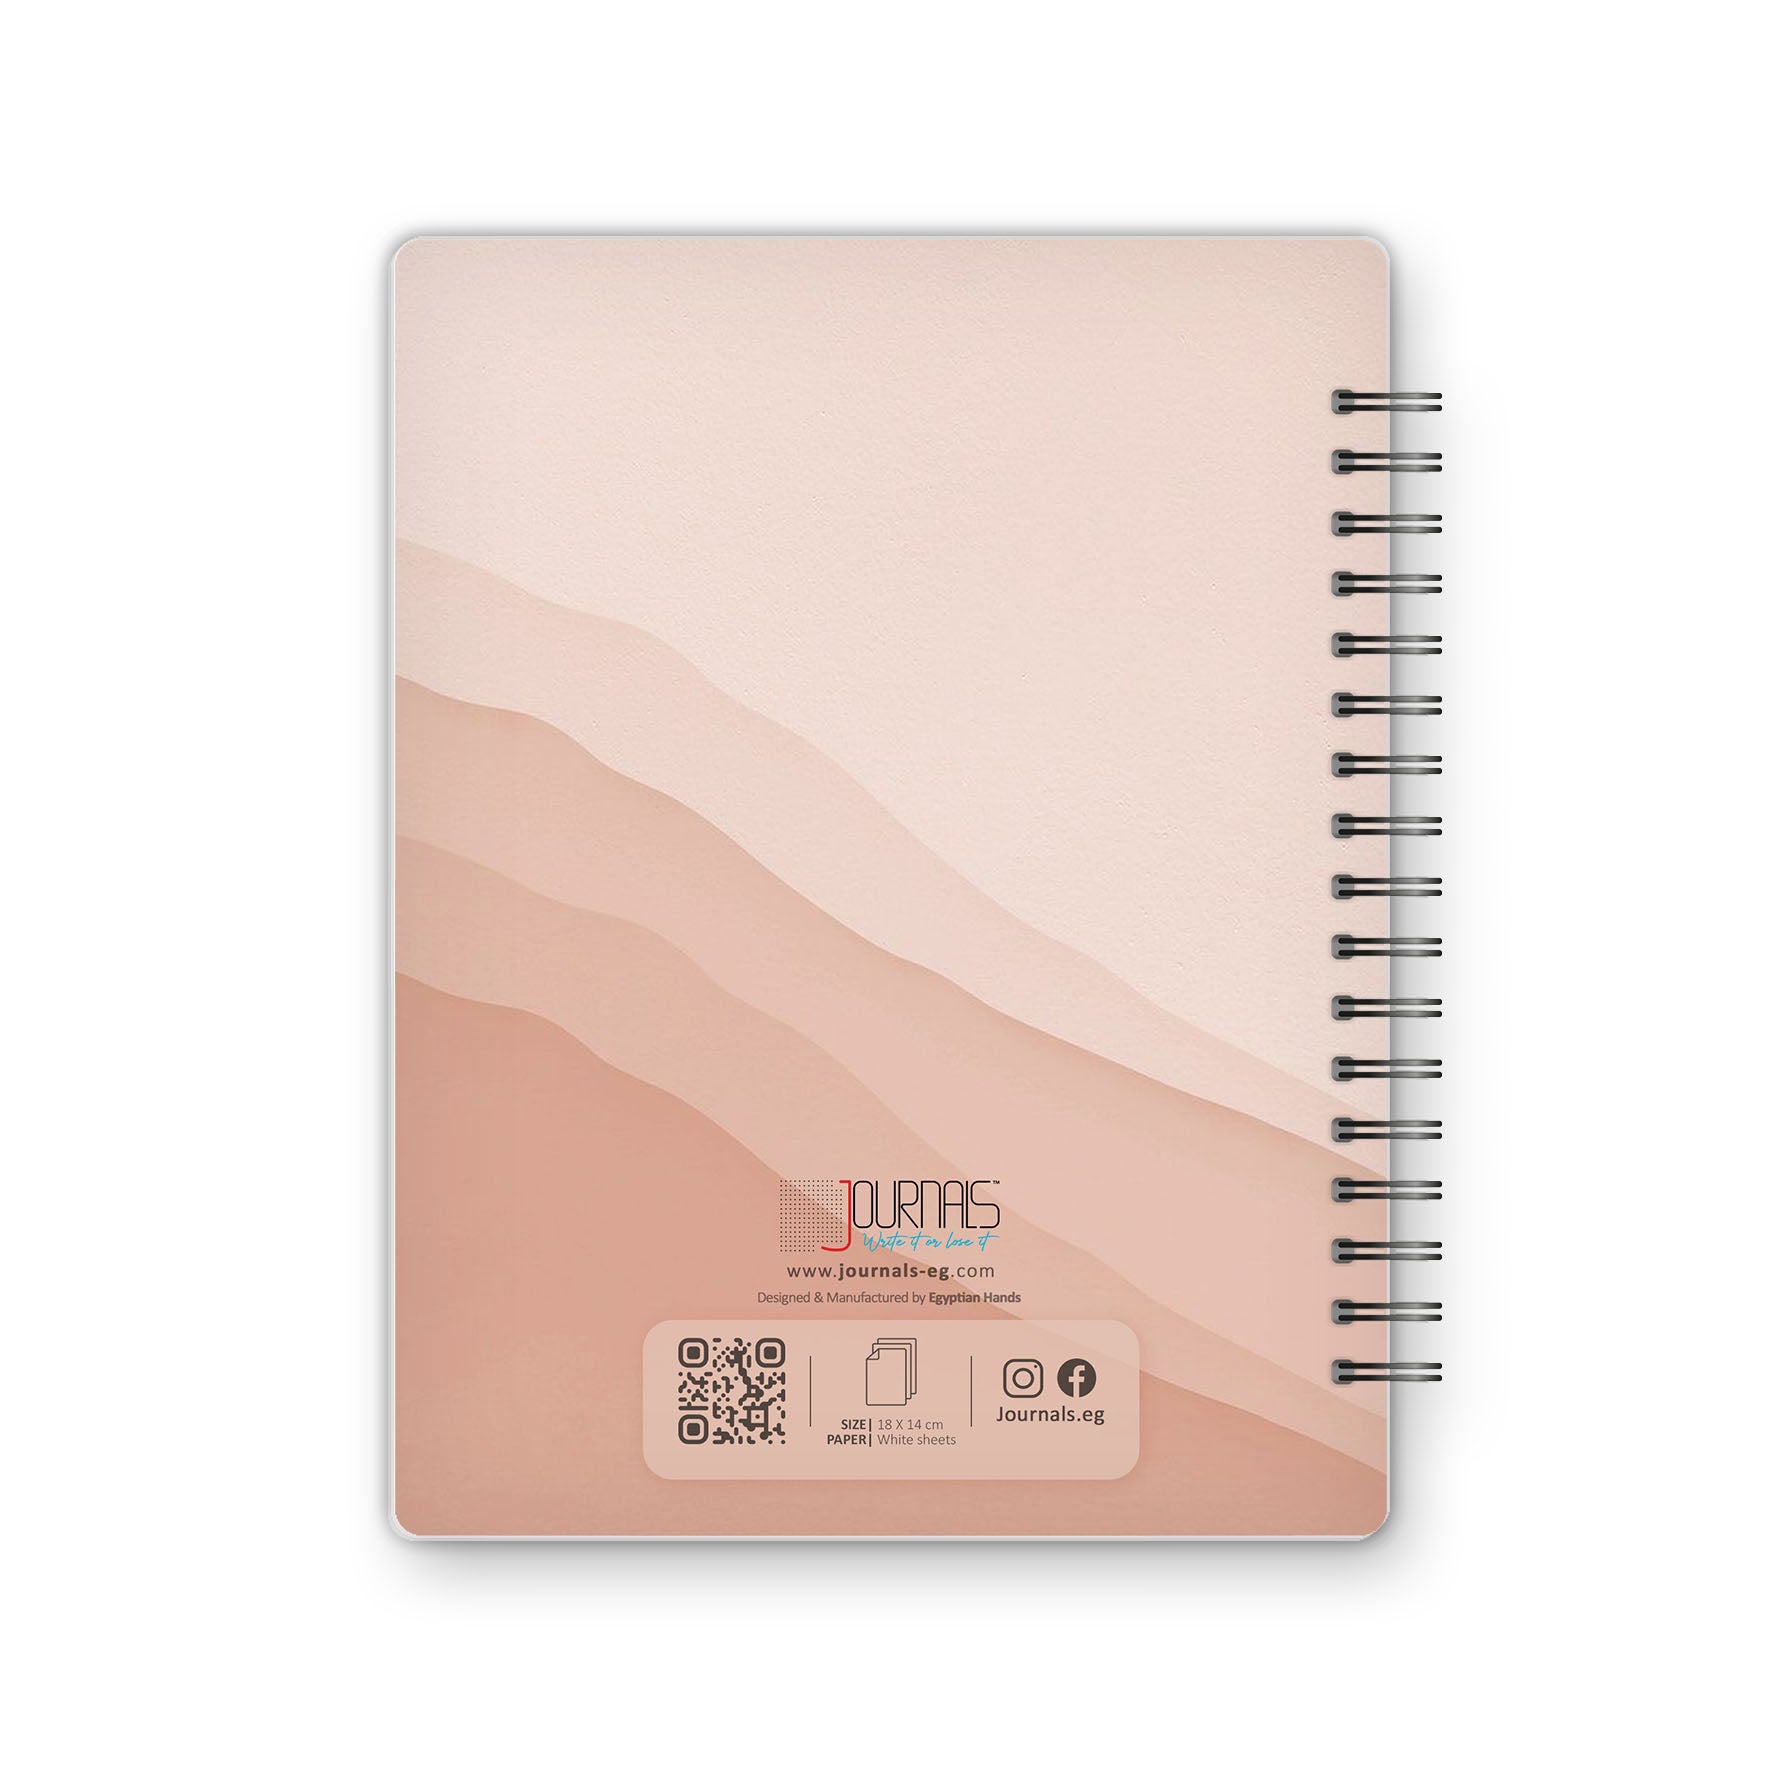 Journal - 18X14 cm - 75 Sheets | Pink Leaf 02 - from Journals